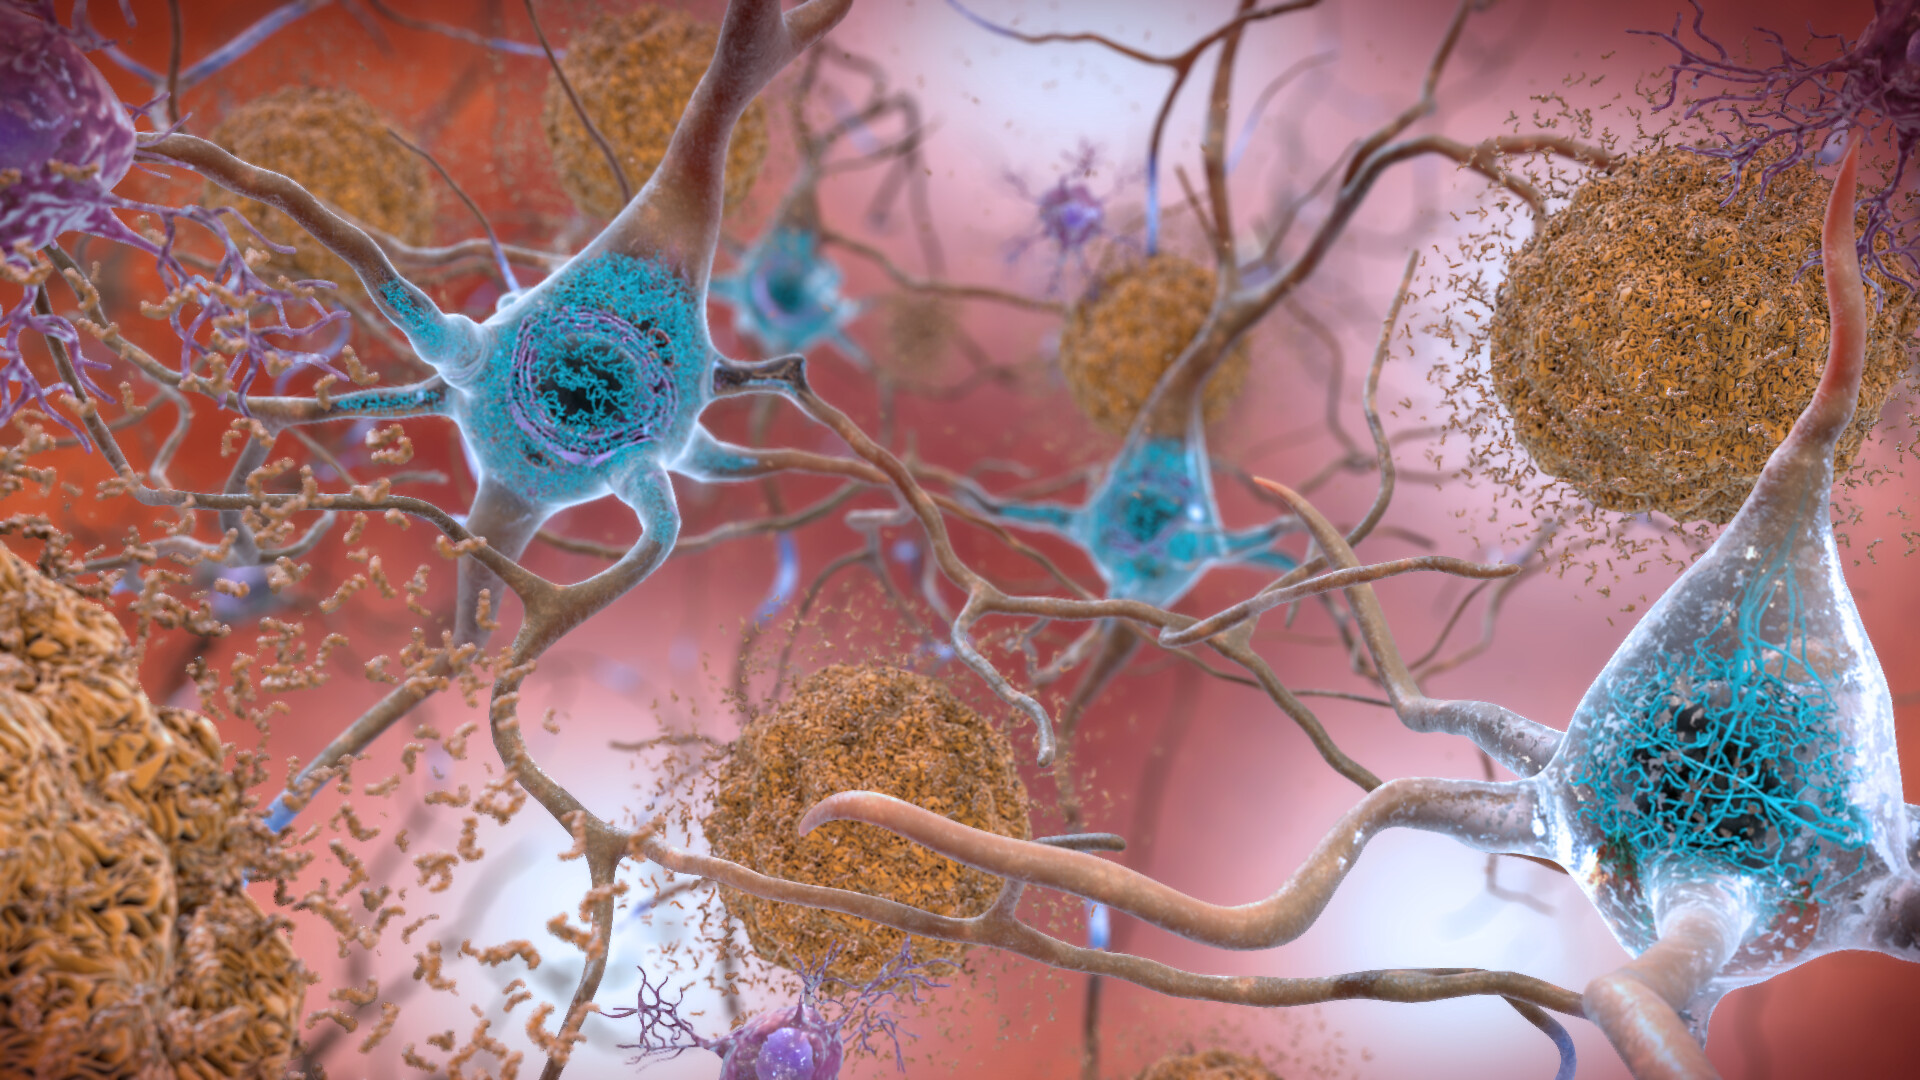 Illustration of several neurones with long cell processes between which spherical beta-amyloid aggregates are located. The cell bodies are interspersed with P-tau fibrils.